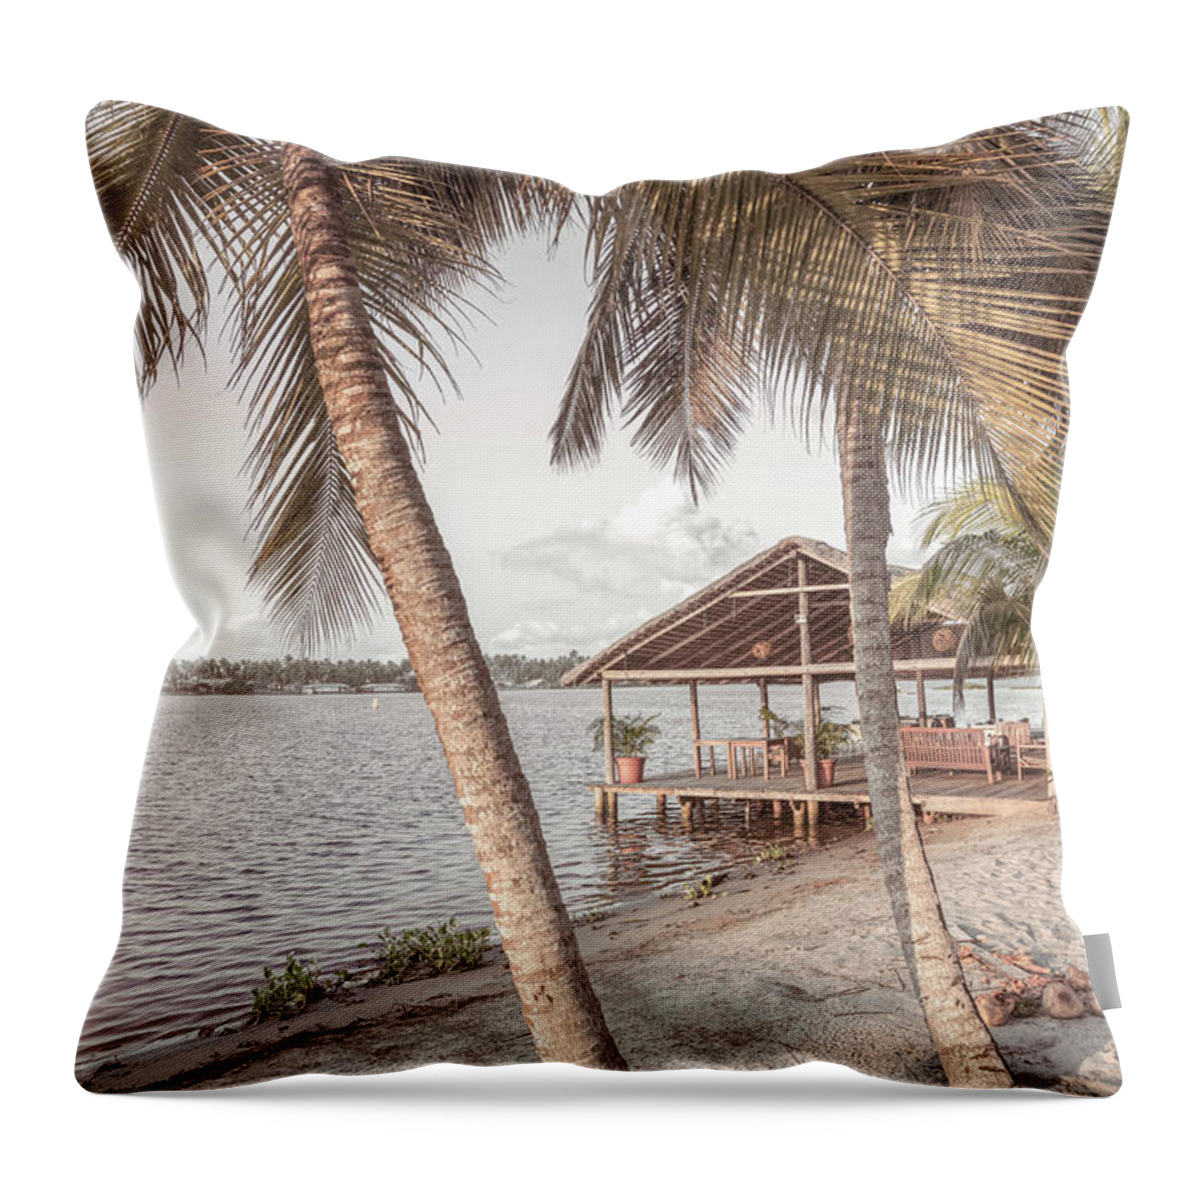 African Throw Pillow featuring the photograph Island Beachhouse Dock by Debra and Dave Vanderlaan